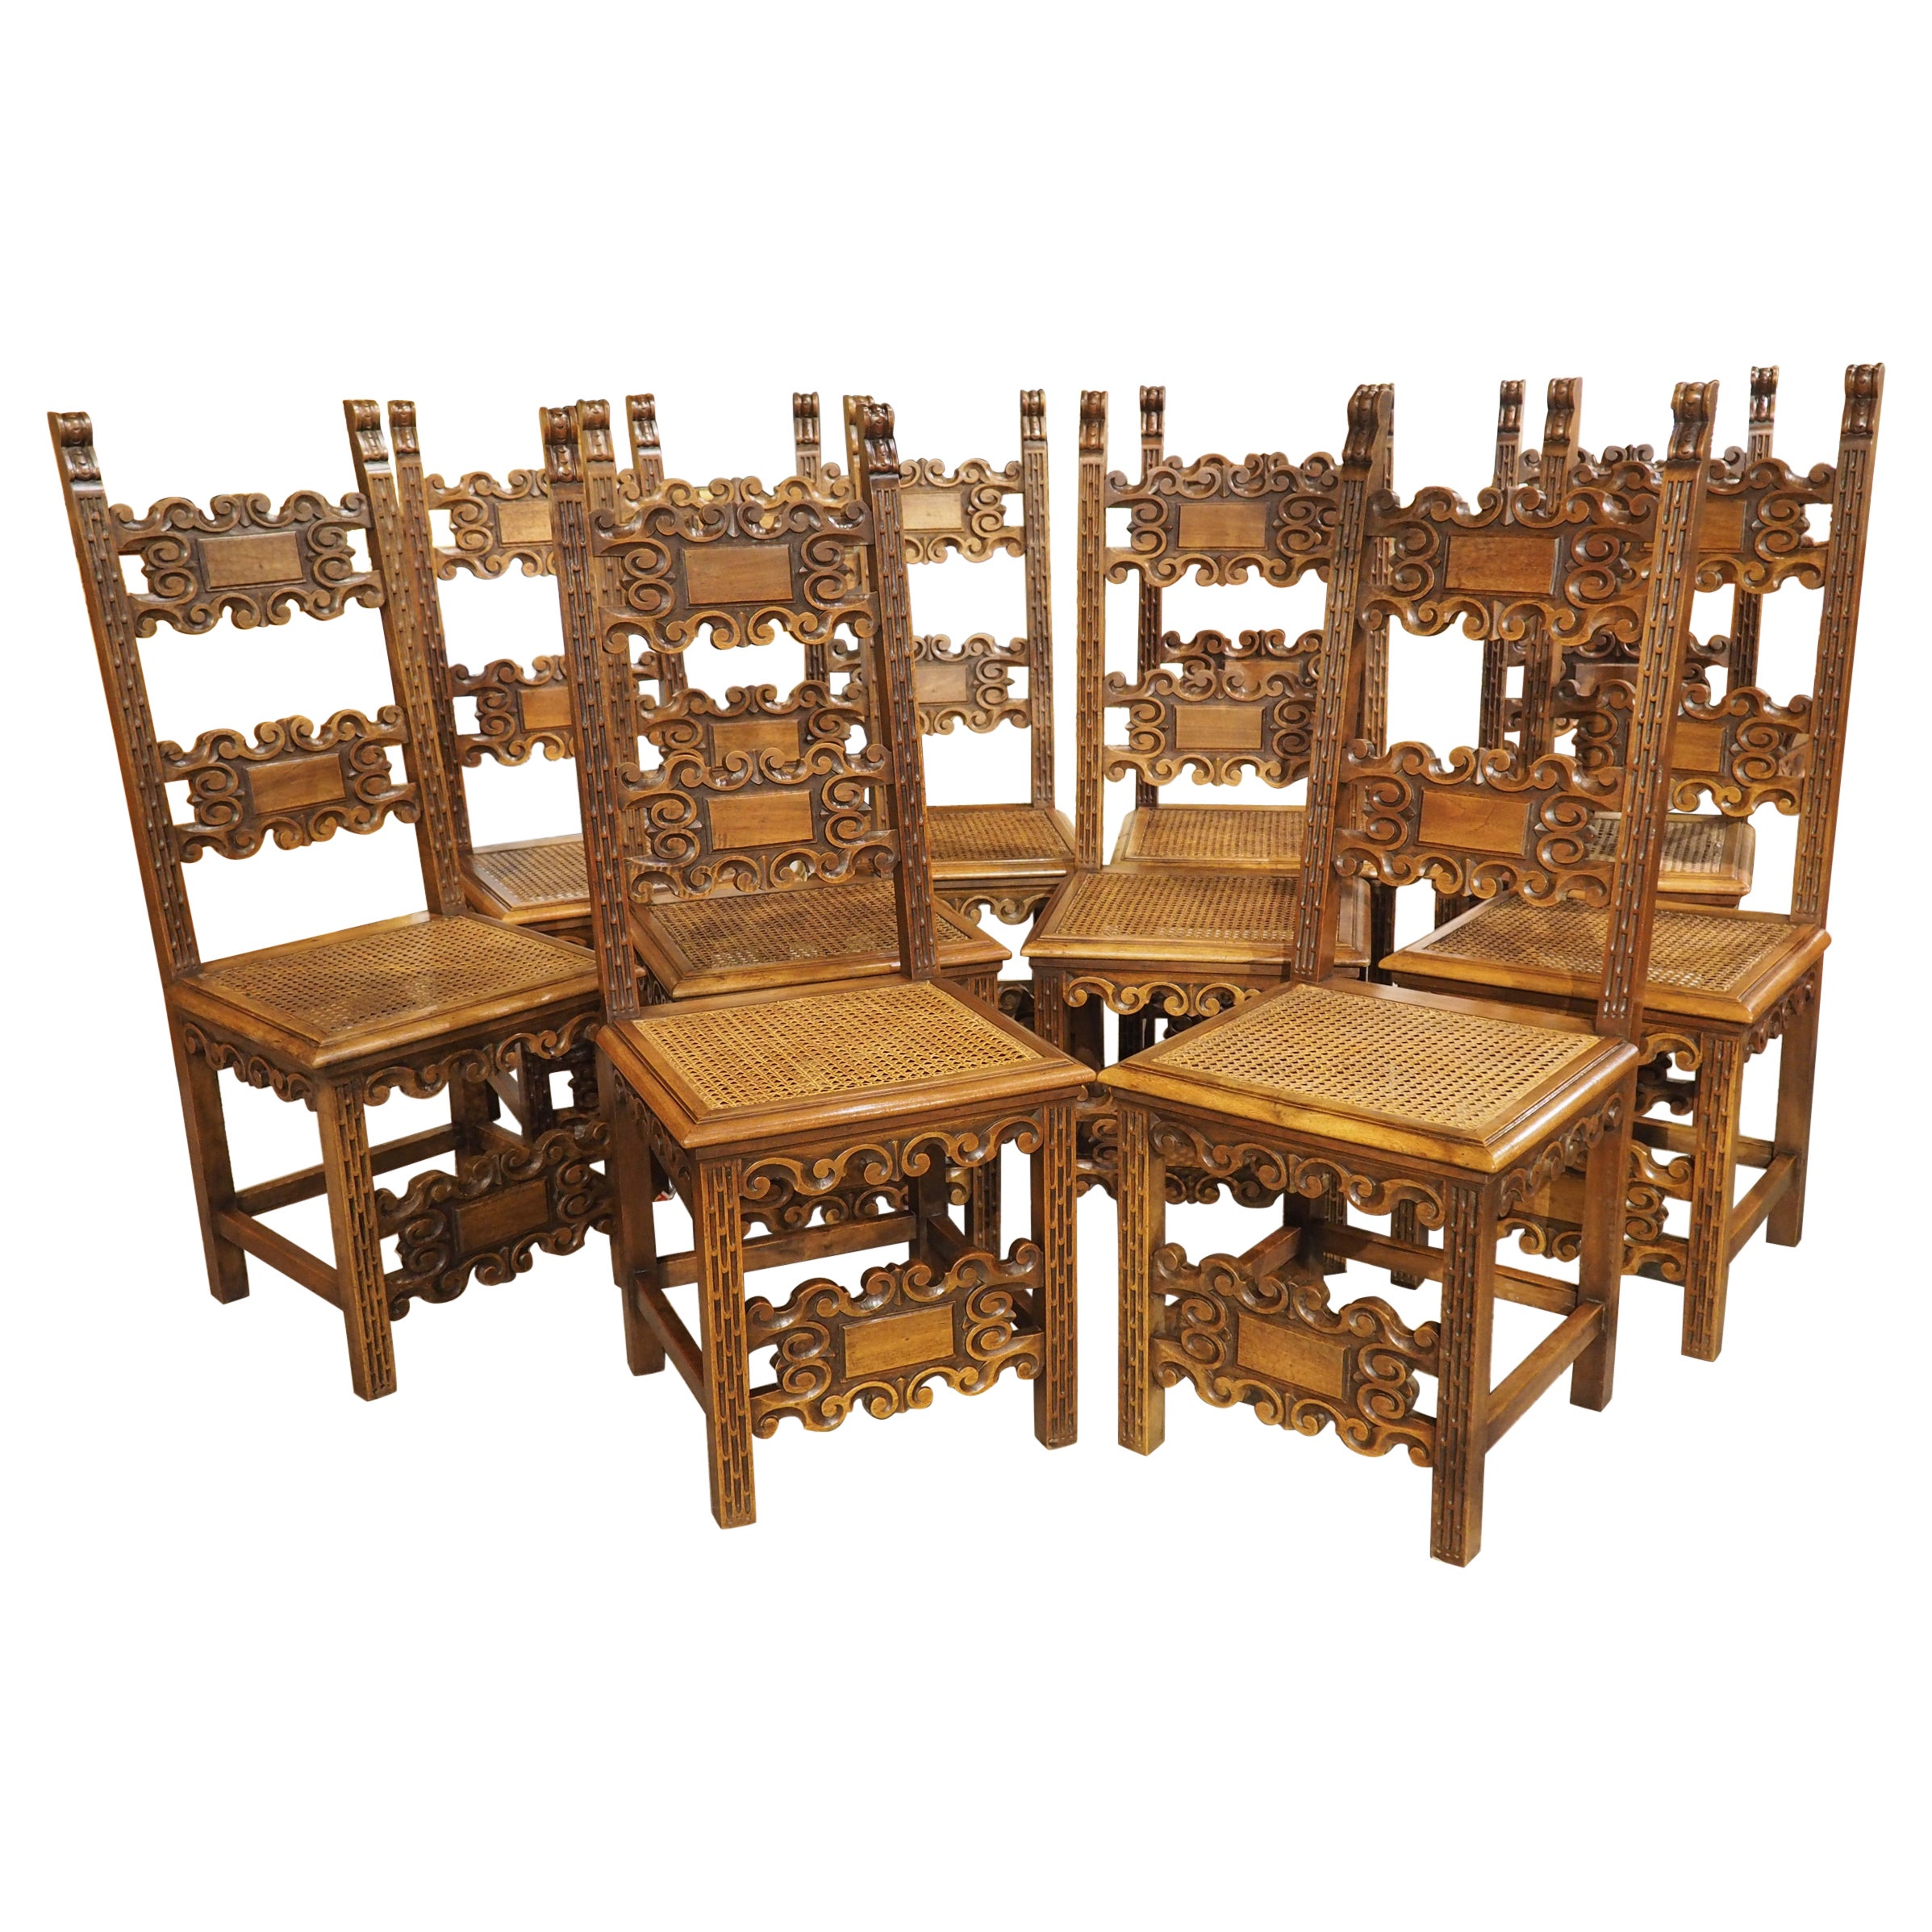 Set of 10 Antique Italian Carved Walnut and Caned Dining Chairs, Circa 1880 For Sale